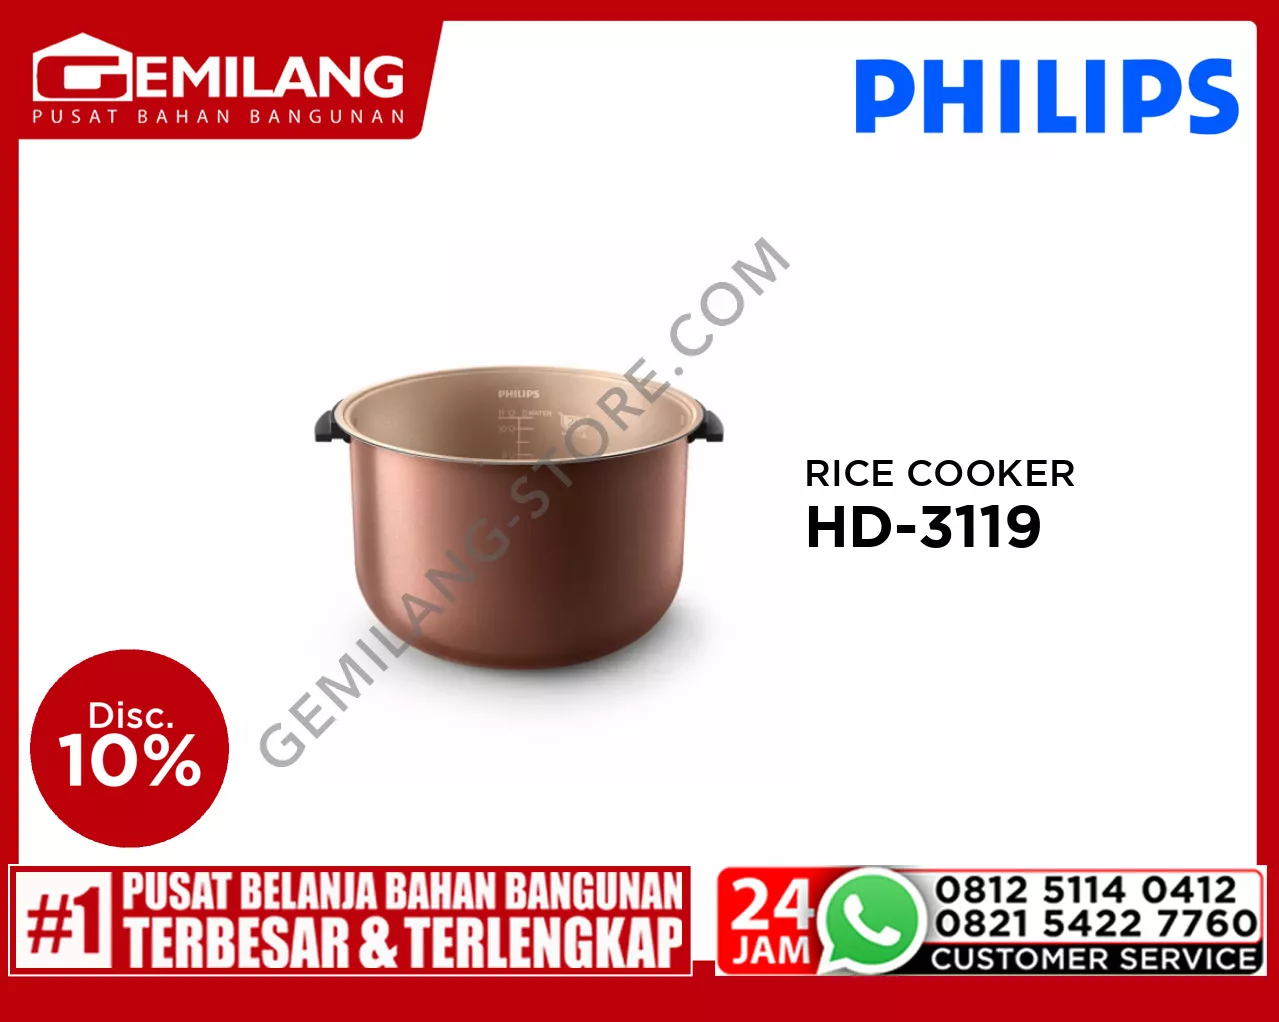 PHILIPS RICE COOKER HD-3119